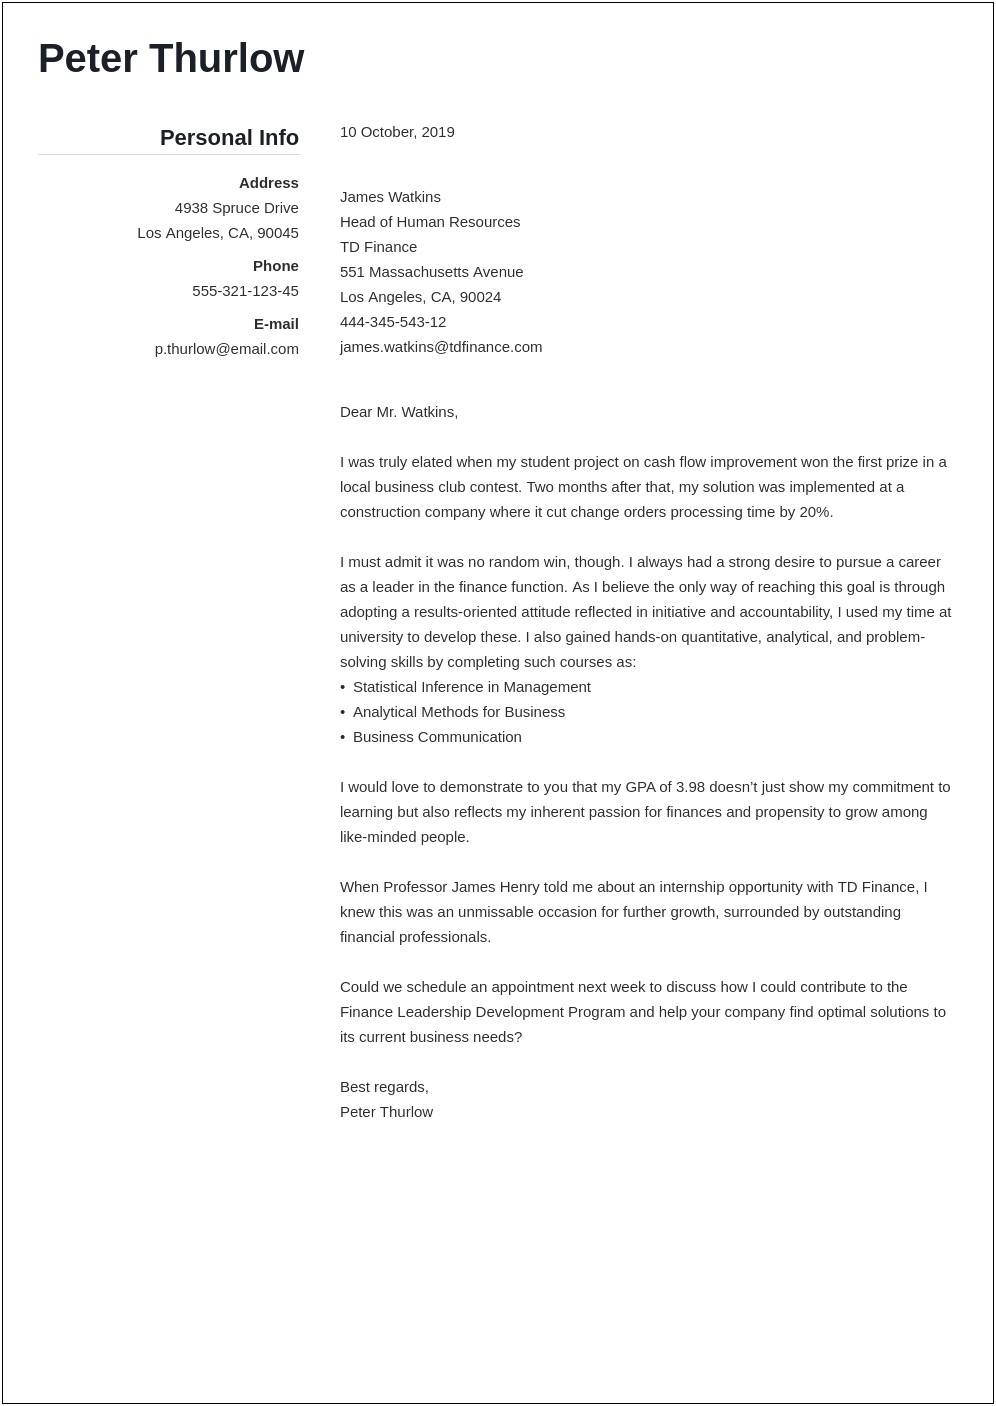 Resume And Cover Letter For College Internship